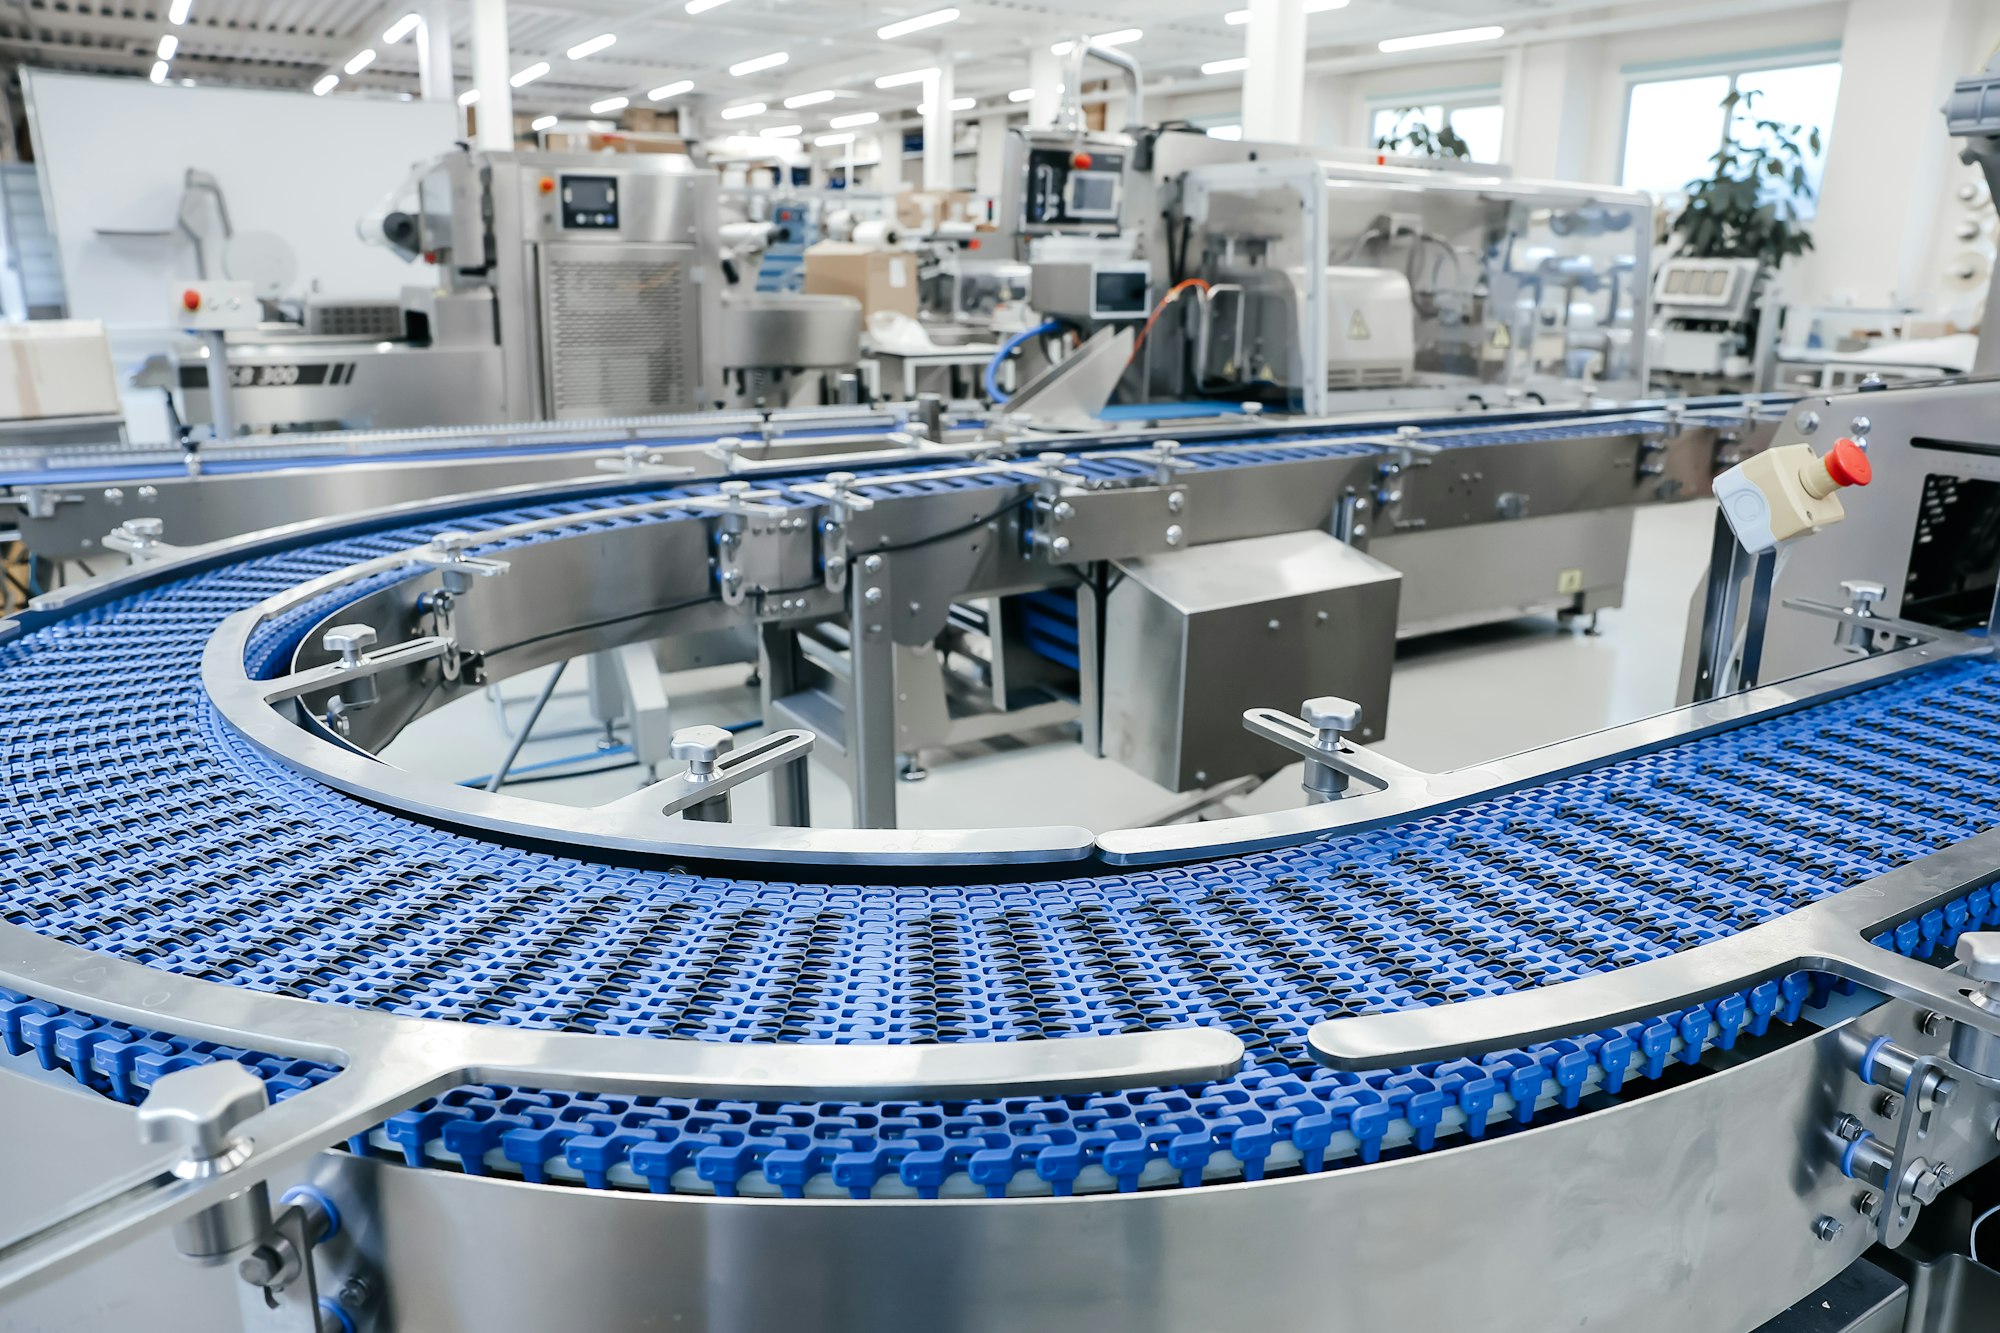 empty modern conveyor belt of production line part of industrial equipment in factory plant - Small Business Loans